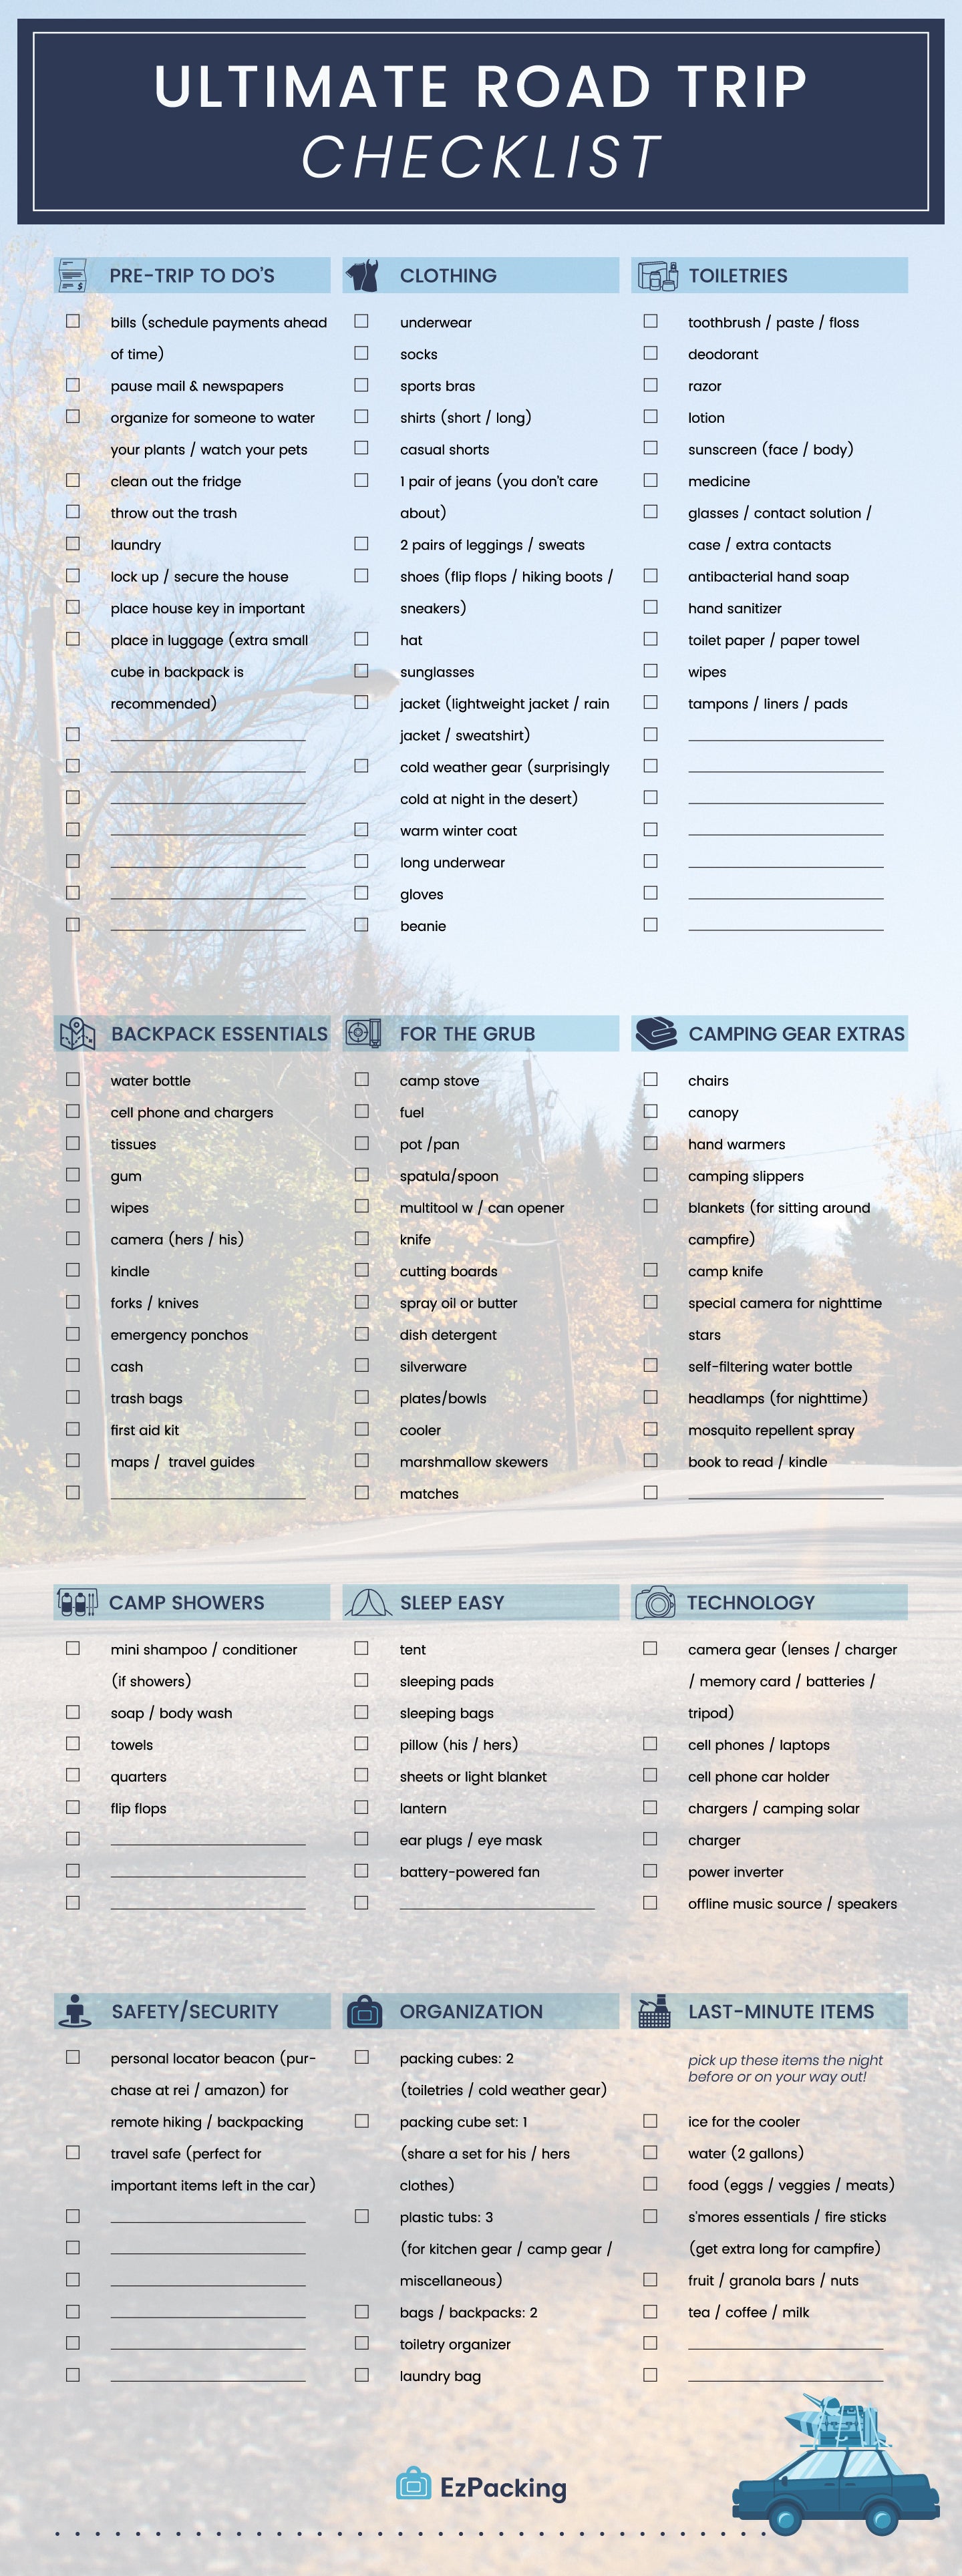 https://cdn.shopify.com/s/files/1/0763/4793/files/Ultimate-road-trip-and-camping-checklist.jpg?v=1548669072